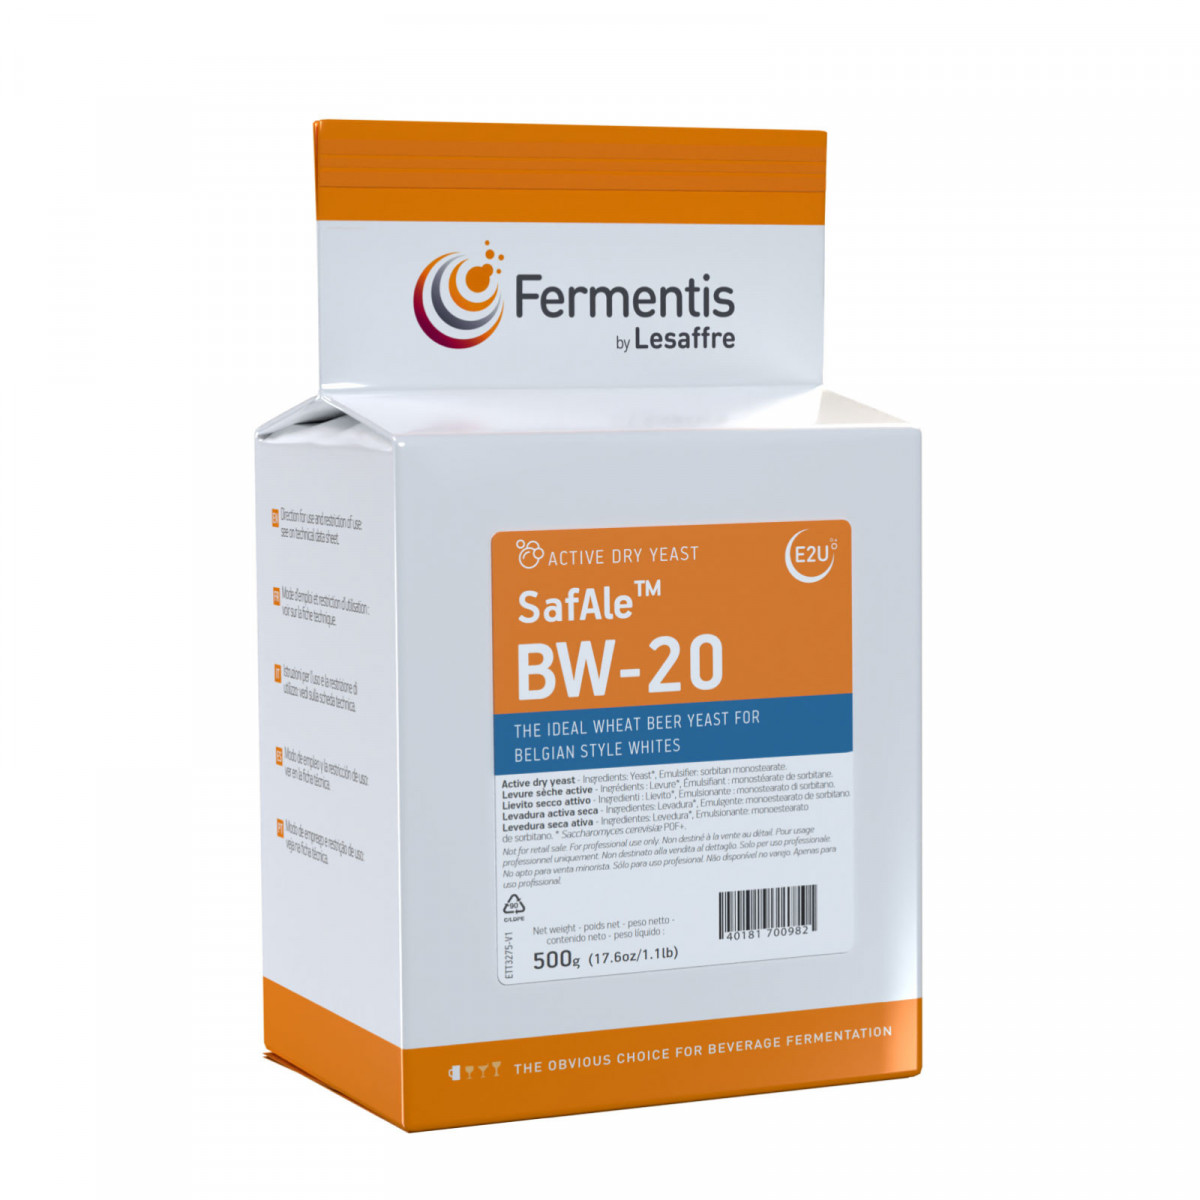 Fermentis dried brewing yeast SafAle™ BW-20 500 g